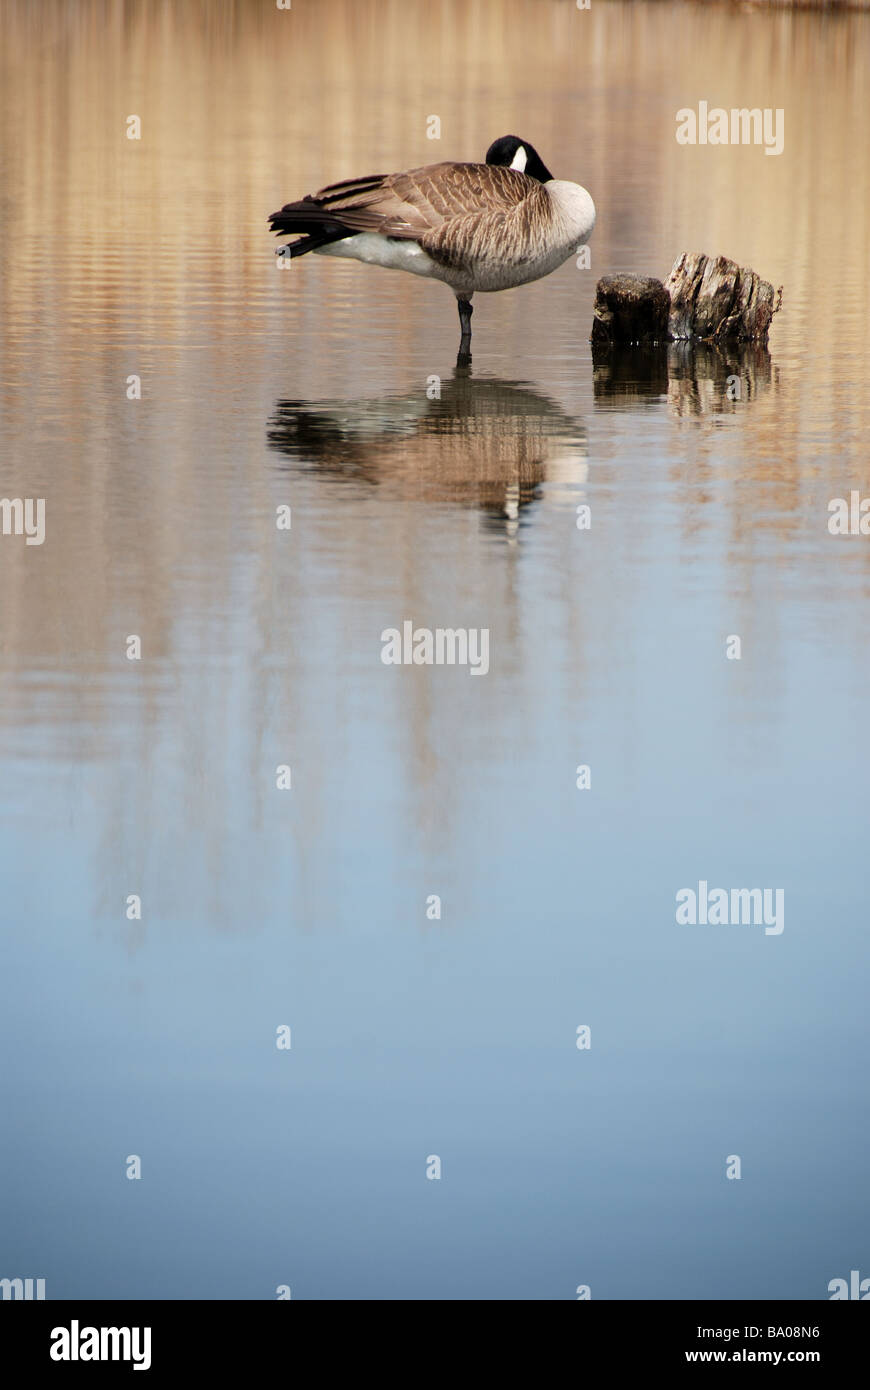 A Canadian goose resting in a pond on the Leslie Street Spit, a man-made bird sanctuary near the center of Toronto Stock Photo